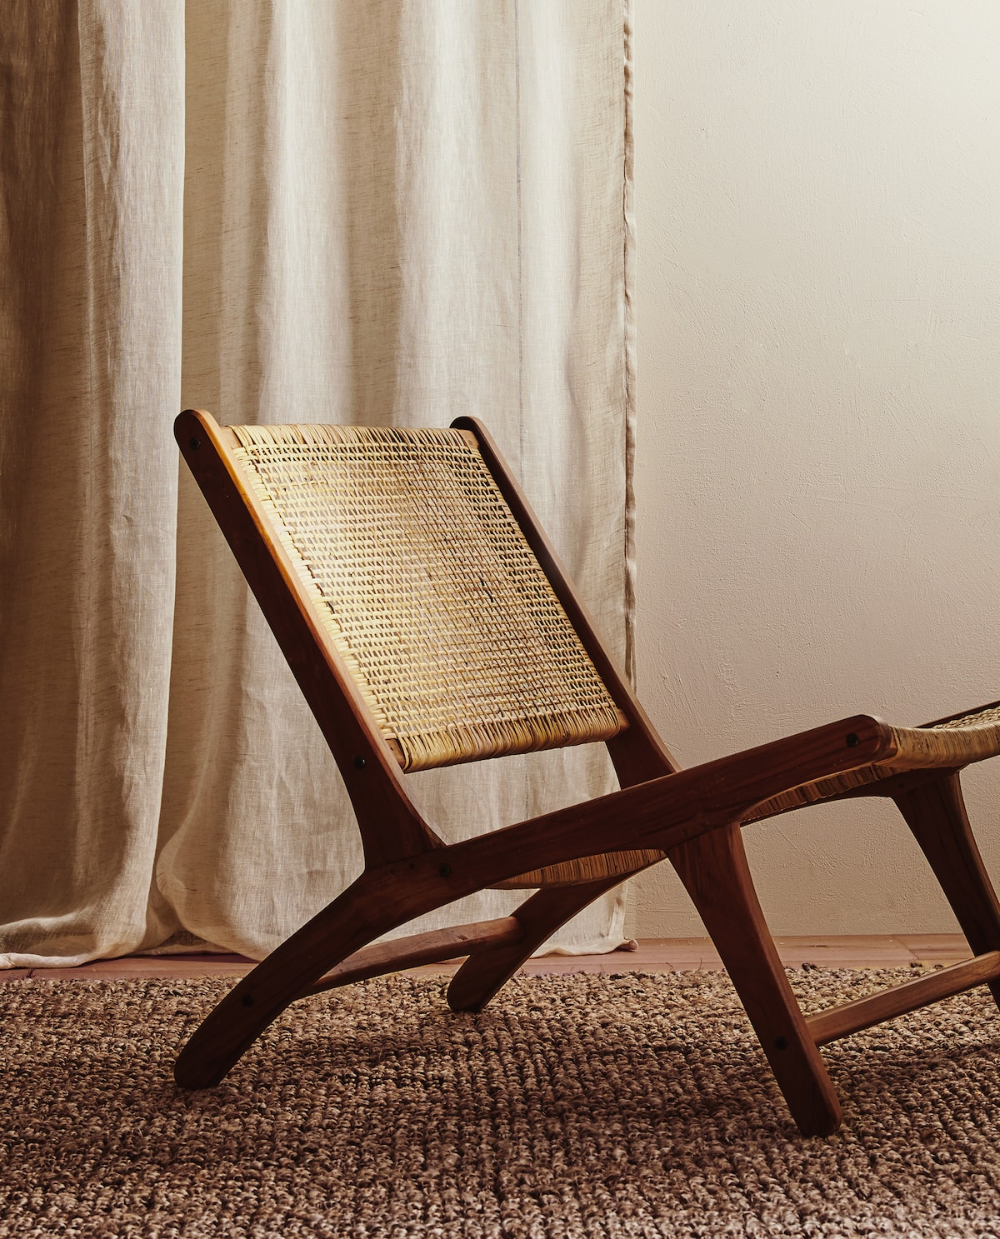 A Guide to Choosing the Perfect Rattan
Chair for Your Home